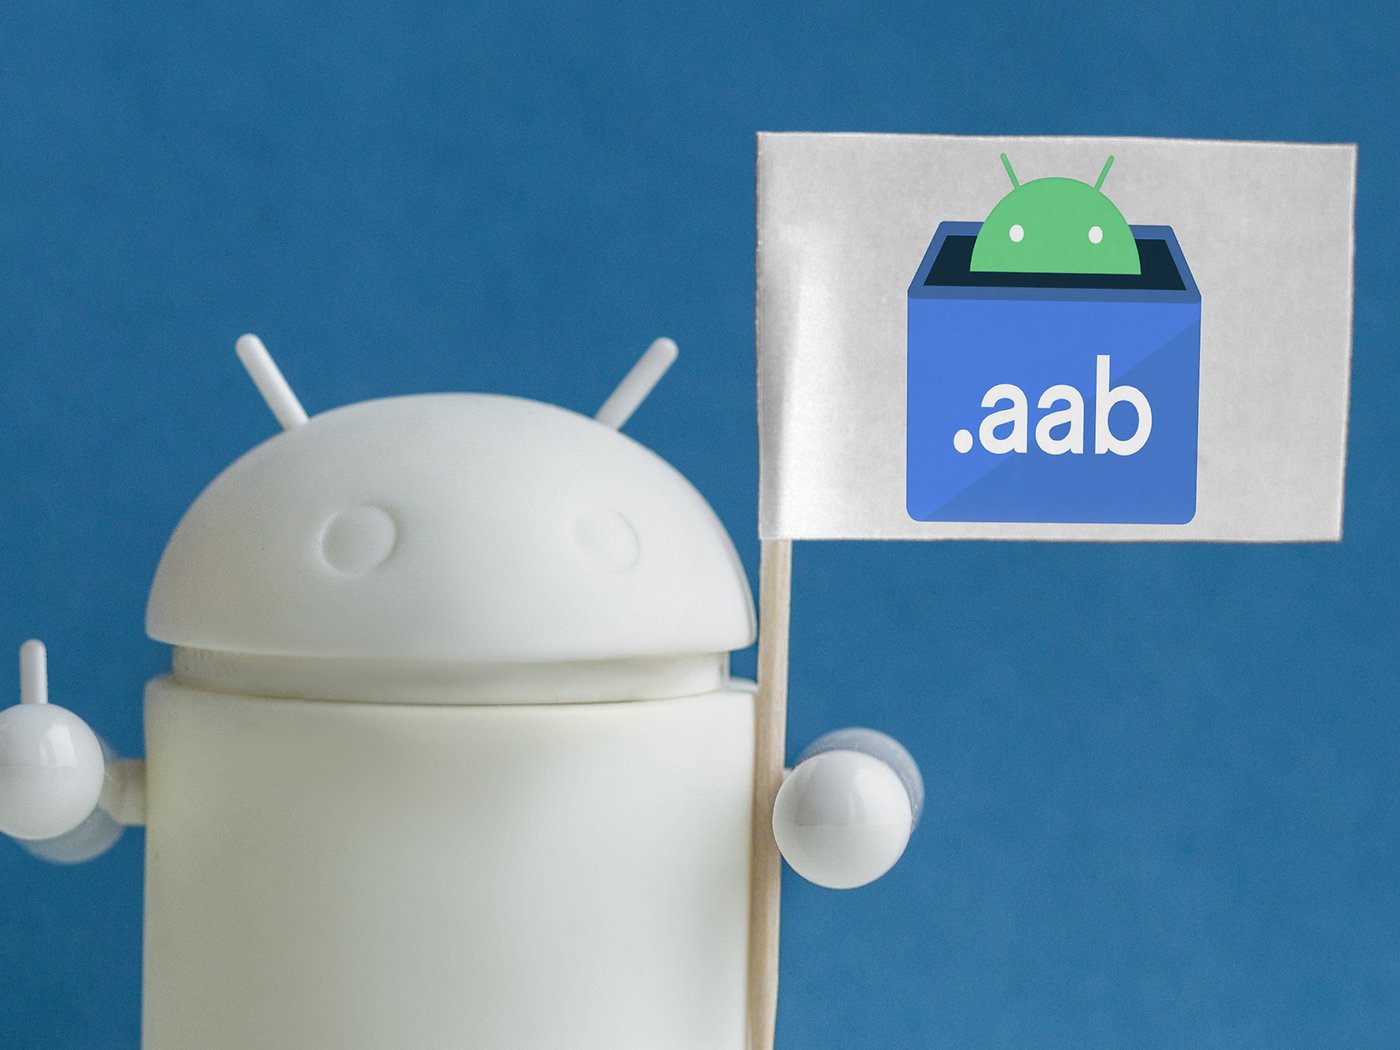 APKs vs AABs - What is the difference between the two Android files? -  AppMySite